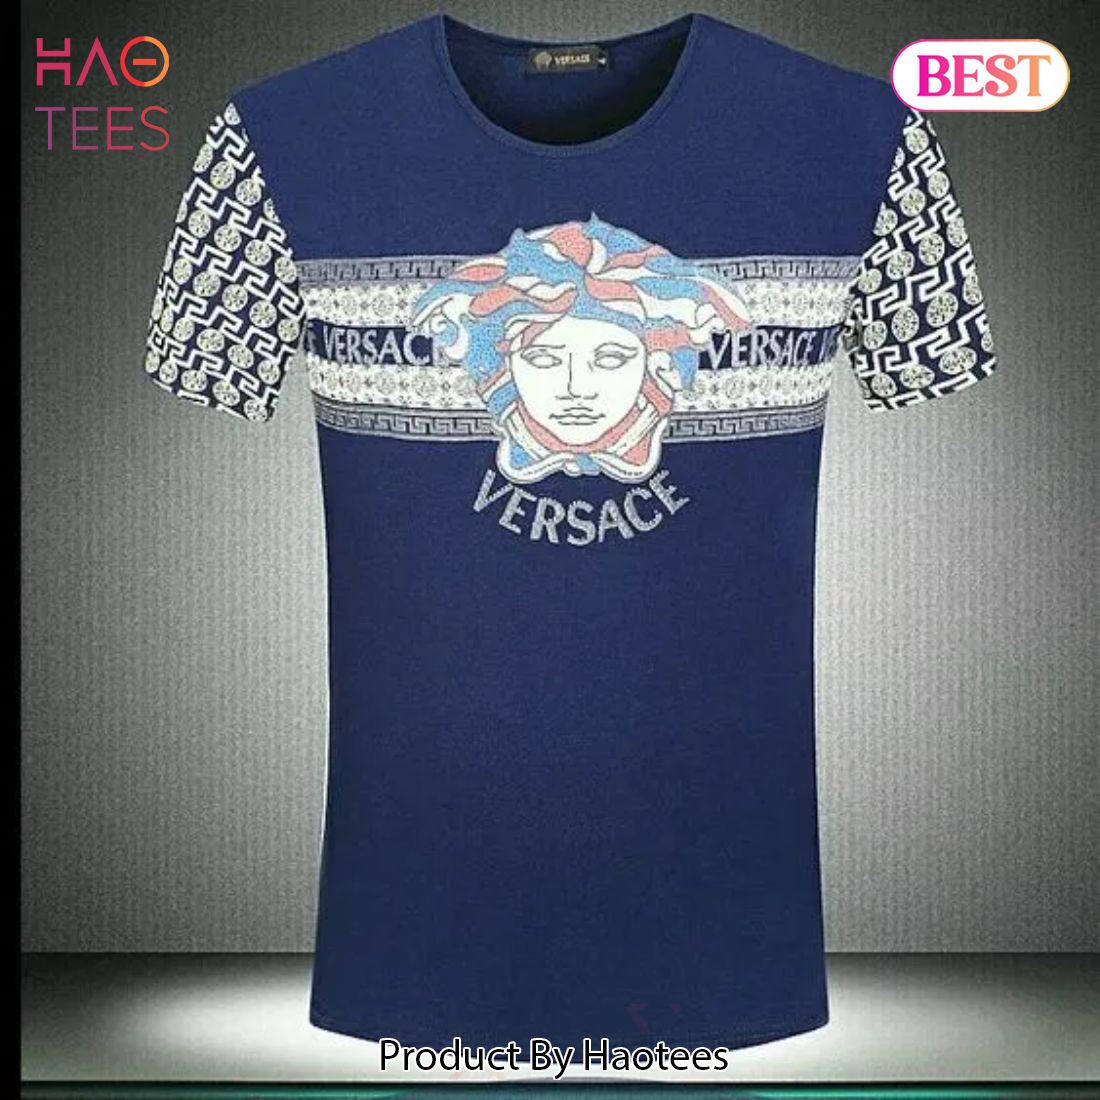 NEW FASHION] Versace Medusa Navy Luxury Brand T-Shirt Outfit For Men Women